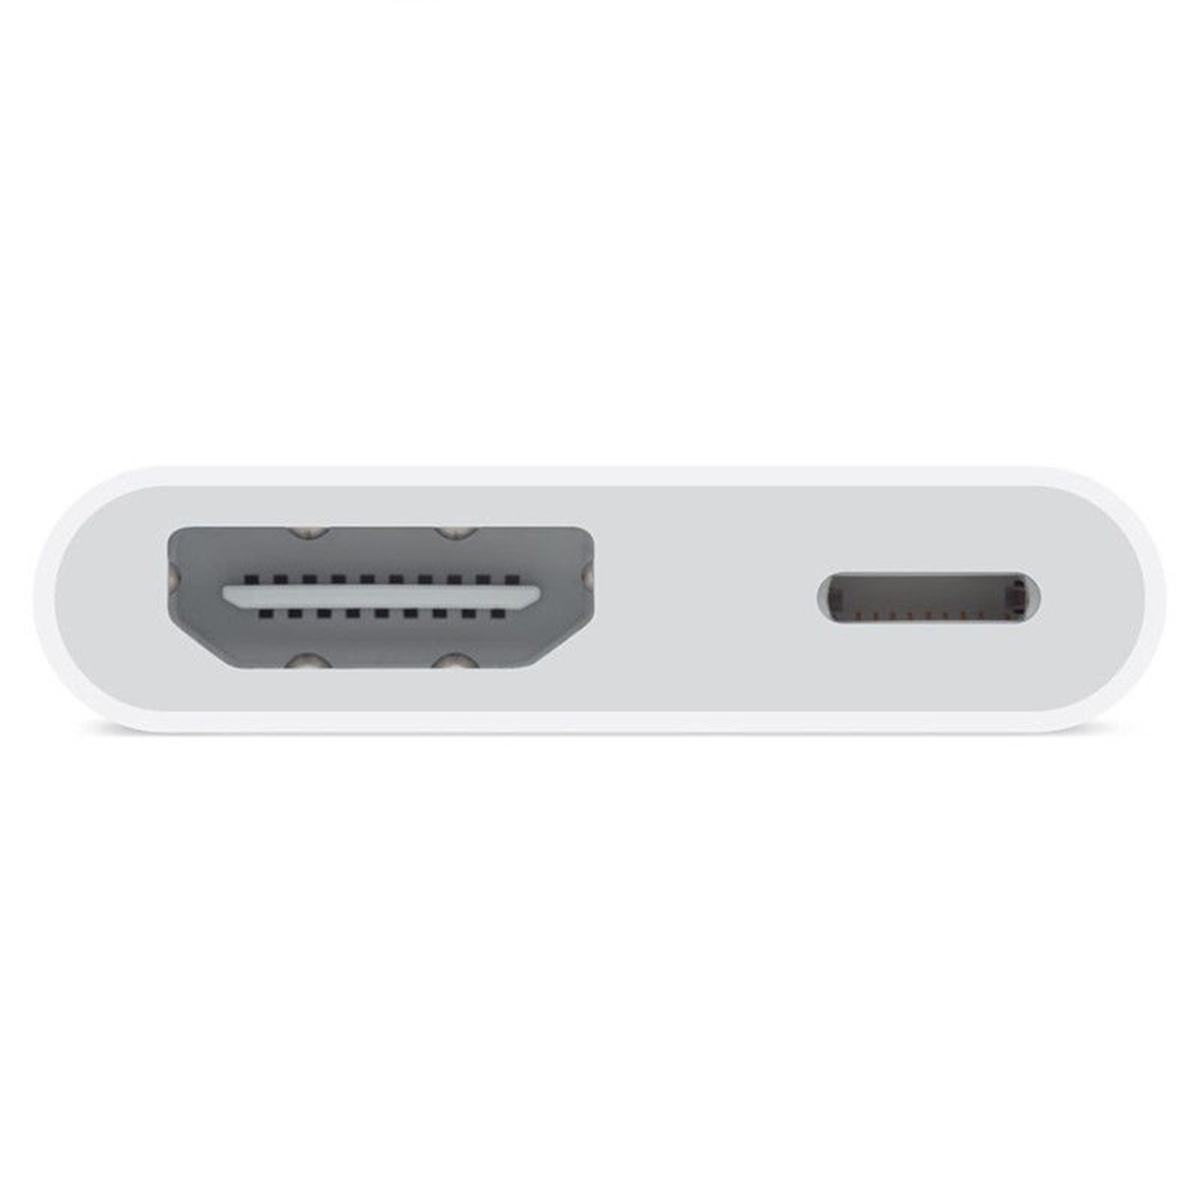 L8-1080P-HD-for-Lightning-to-HD-Wired-TV-Display-Dongle-for-Iphone-1210936